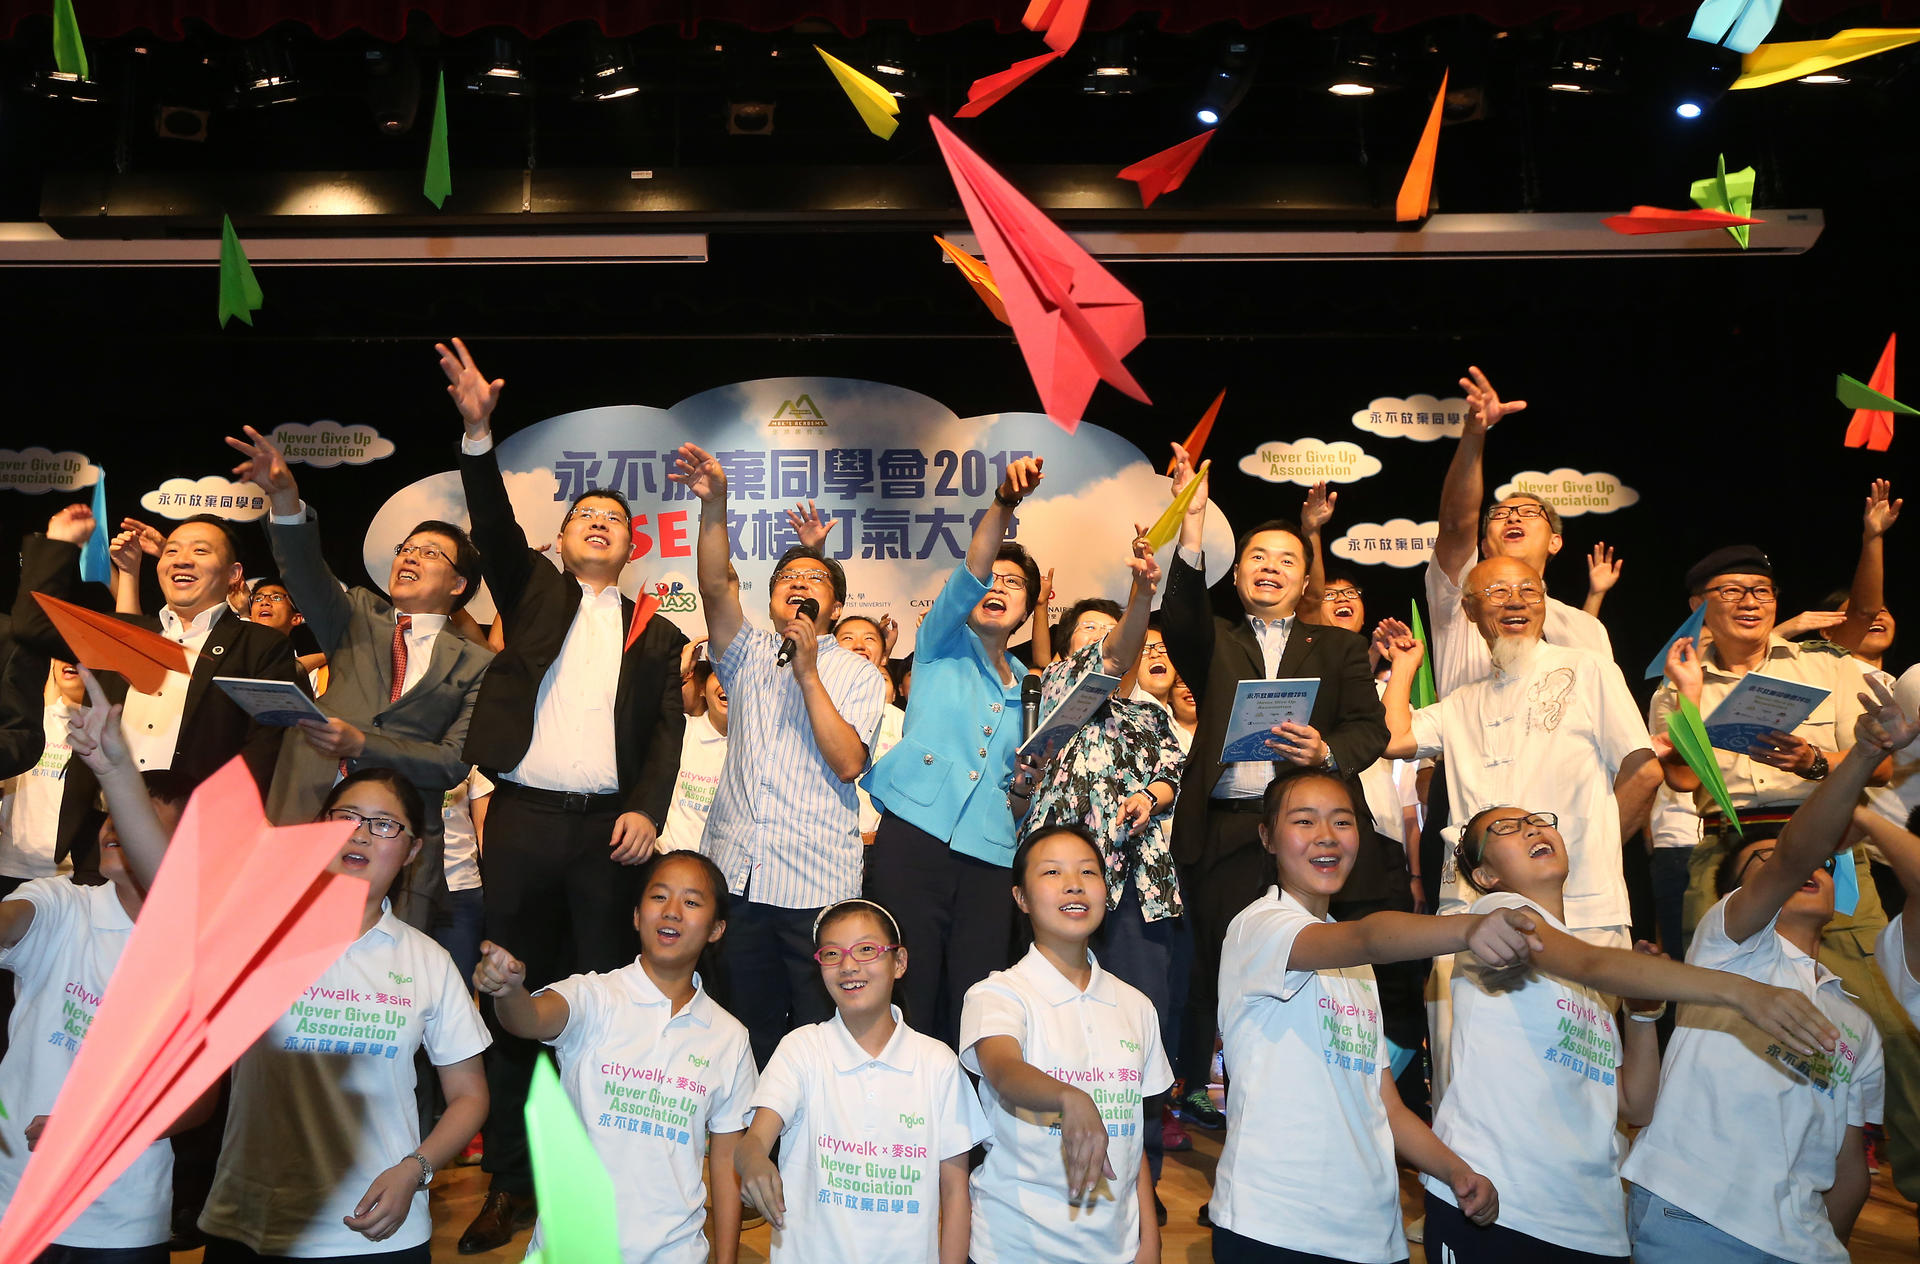 Chief Secretary Carrie lam Cheng Yuet-ngor (Second Row, from Left Fifth) takes the lead in reading out slogans with the students during Never Give Up Association 2015: DSE Cheer Up Party at the Hong Kong Baptist University in Kowloon Tong. Photo: David Wong